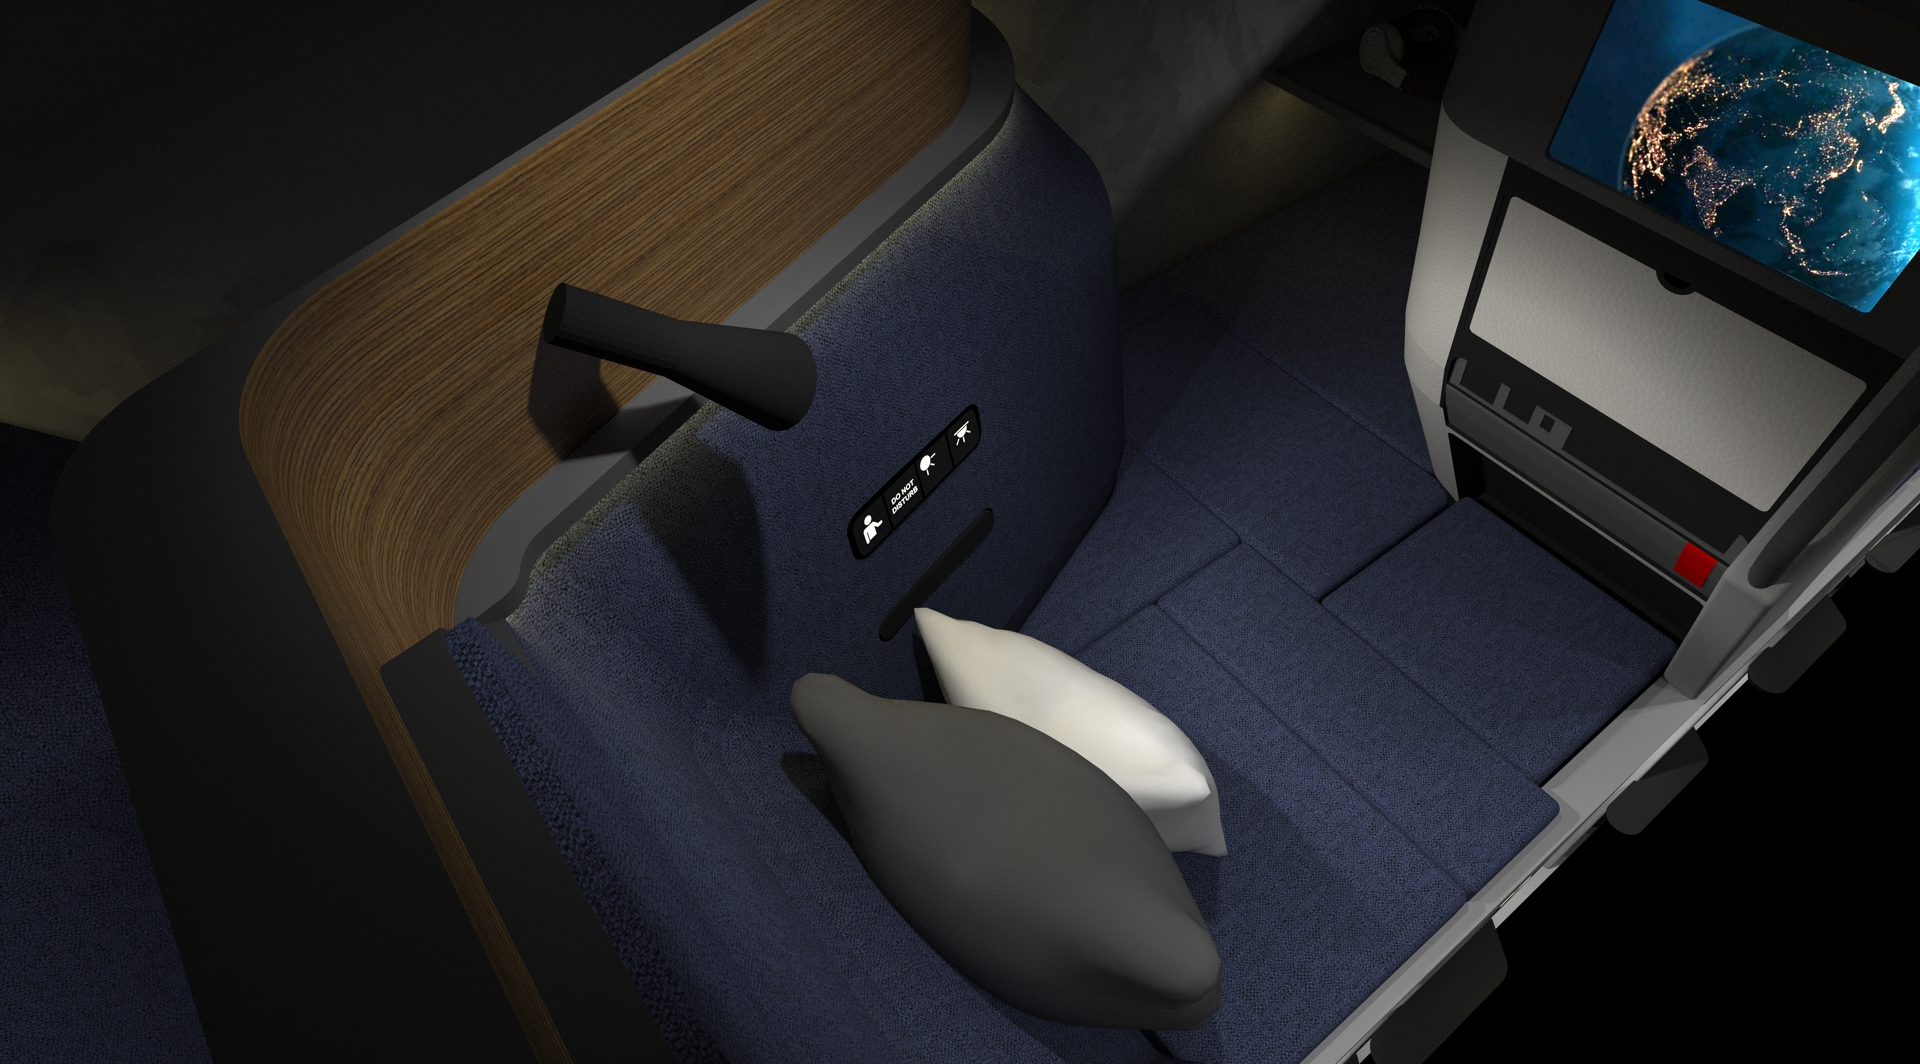 zephyr seat – A lie-flat airline seat for Economy Class travelers